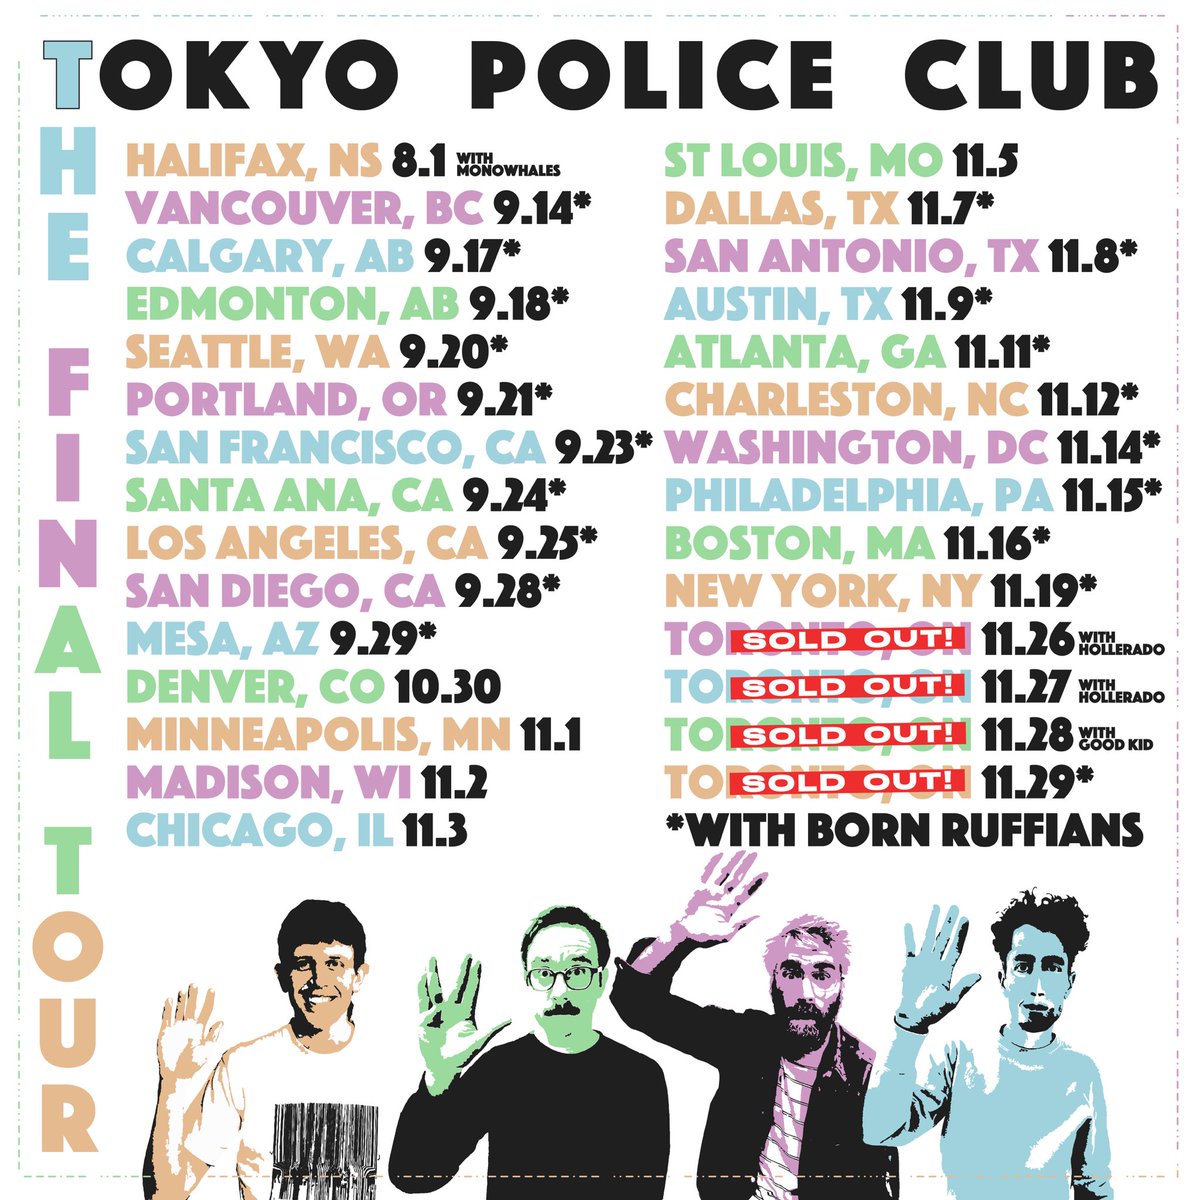 HALIFAX, YOU ASKED, YOU WERE PATIENT, AND YOU SHALL RECEIVE IN FULL 🌟 we will be opening for the legendary @TokyoPoliceClub for their final tour and we are absolutely honoured to be a part of this send off. See you August 1 🦞 tickets are on sale TODAY monowhales.com/tour